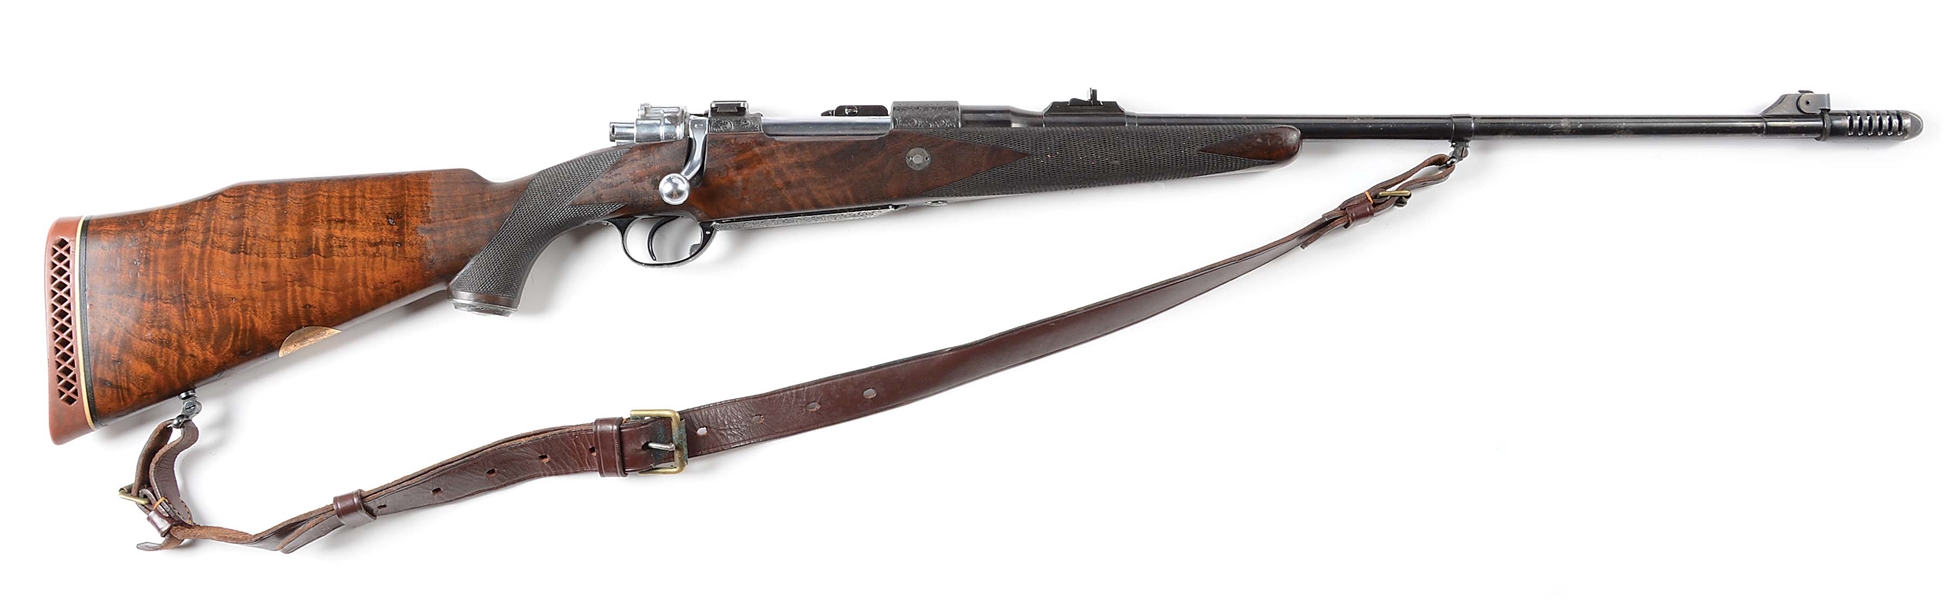 (C) HOLLAND & HOLLAND MODEL DELUXE BOLT ACTION TAKE DOWN SPORTING RIFLE IN 30 SUPER  WITH SCOPE AND CASE